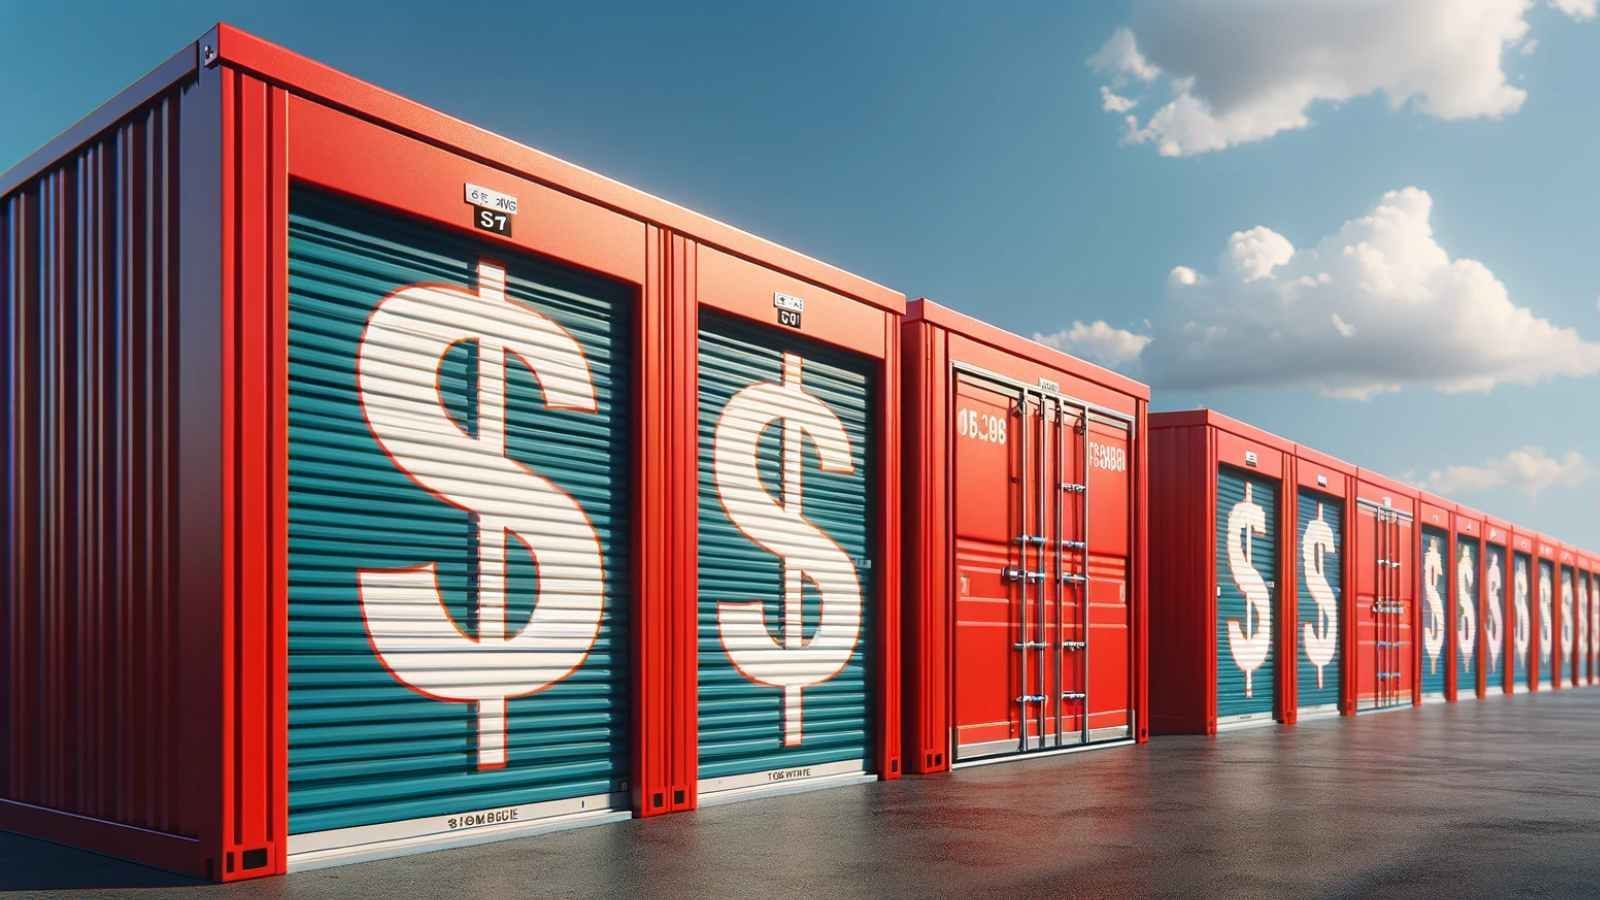 cheap self storage units with money symbols on the front.